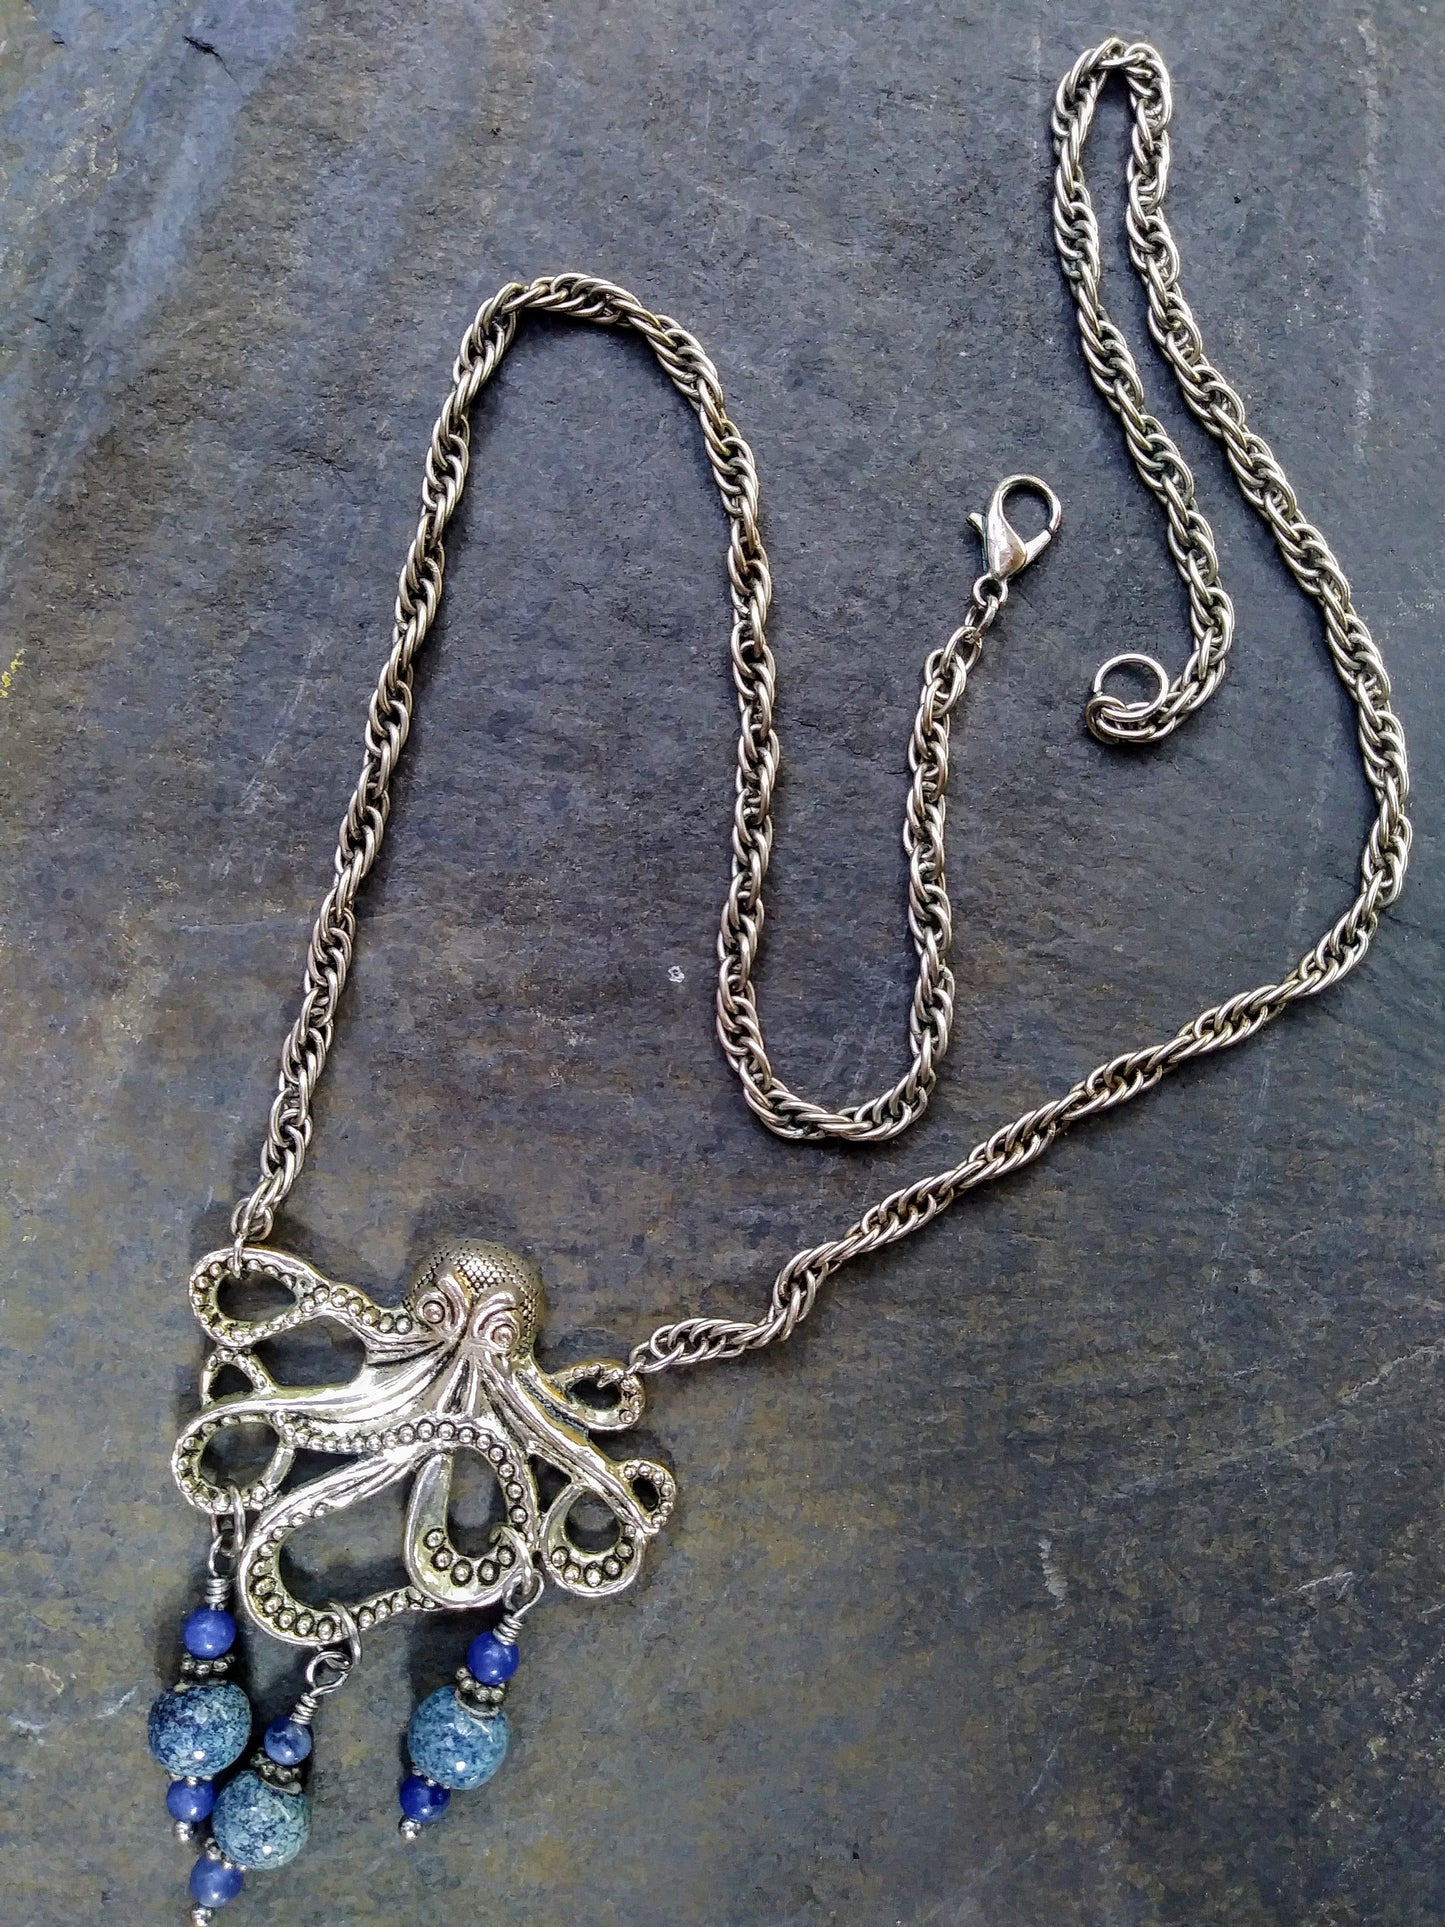 Ocean Blue Silver Kraken Octopus Necklace on Thick Silver Rope Chain